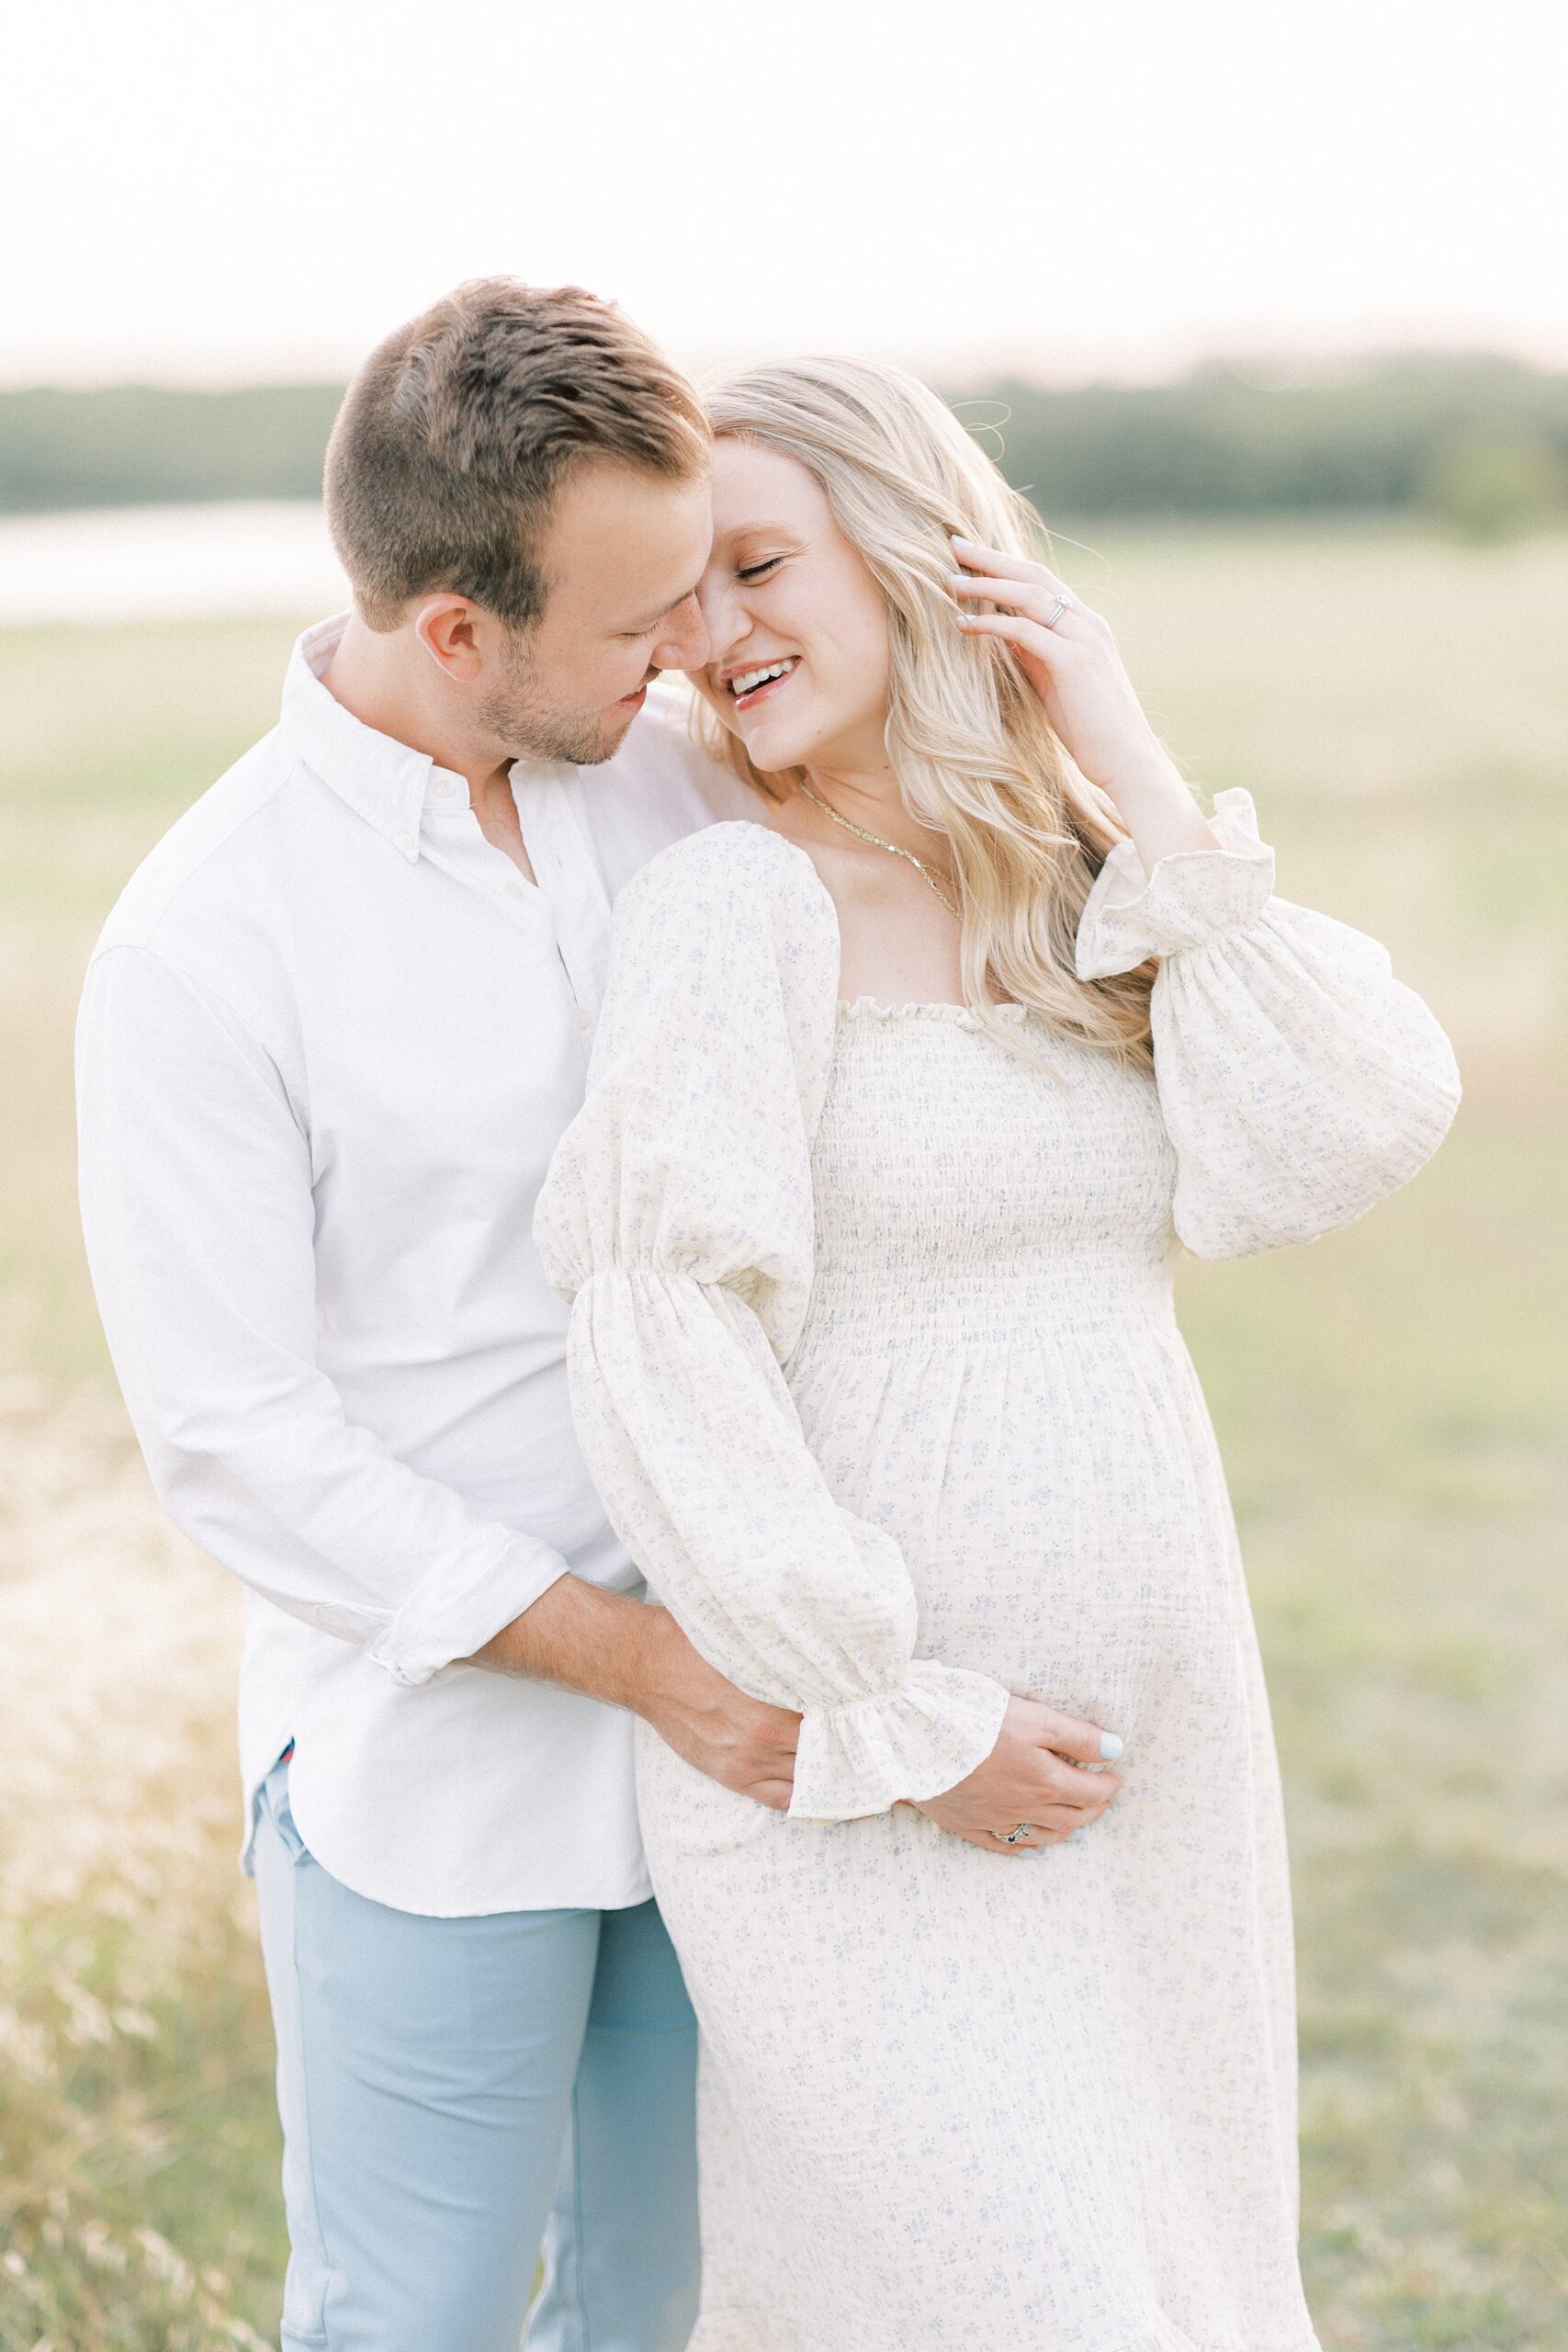 Expecting parents hold the bump while leaning in for a kiss in a windy field at sunset